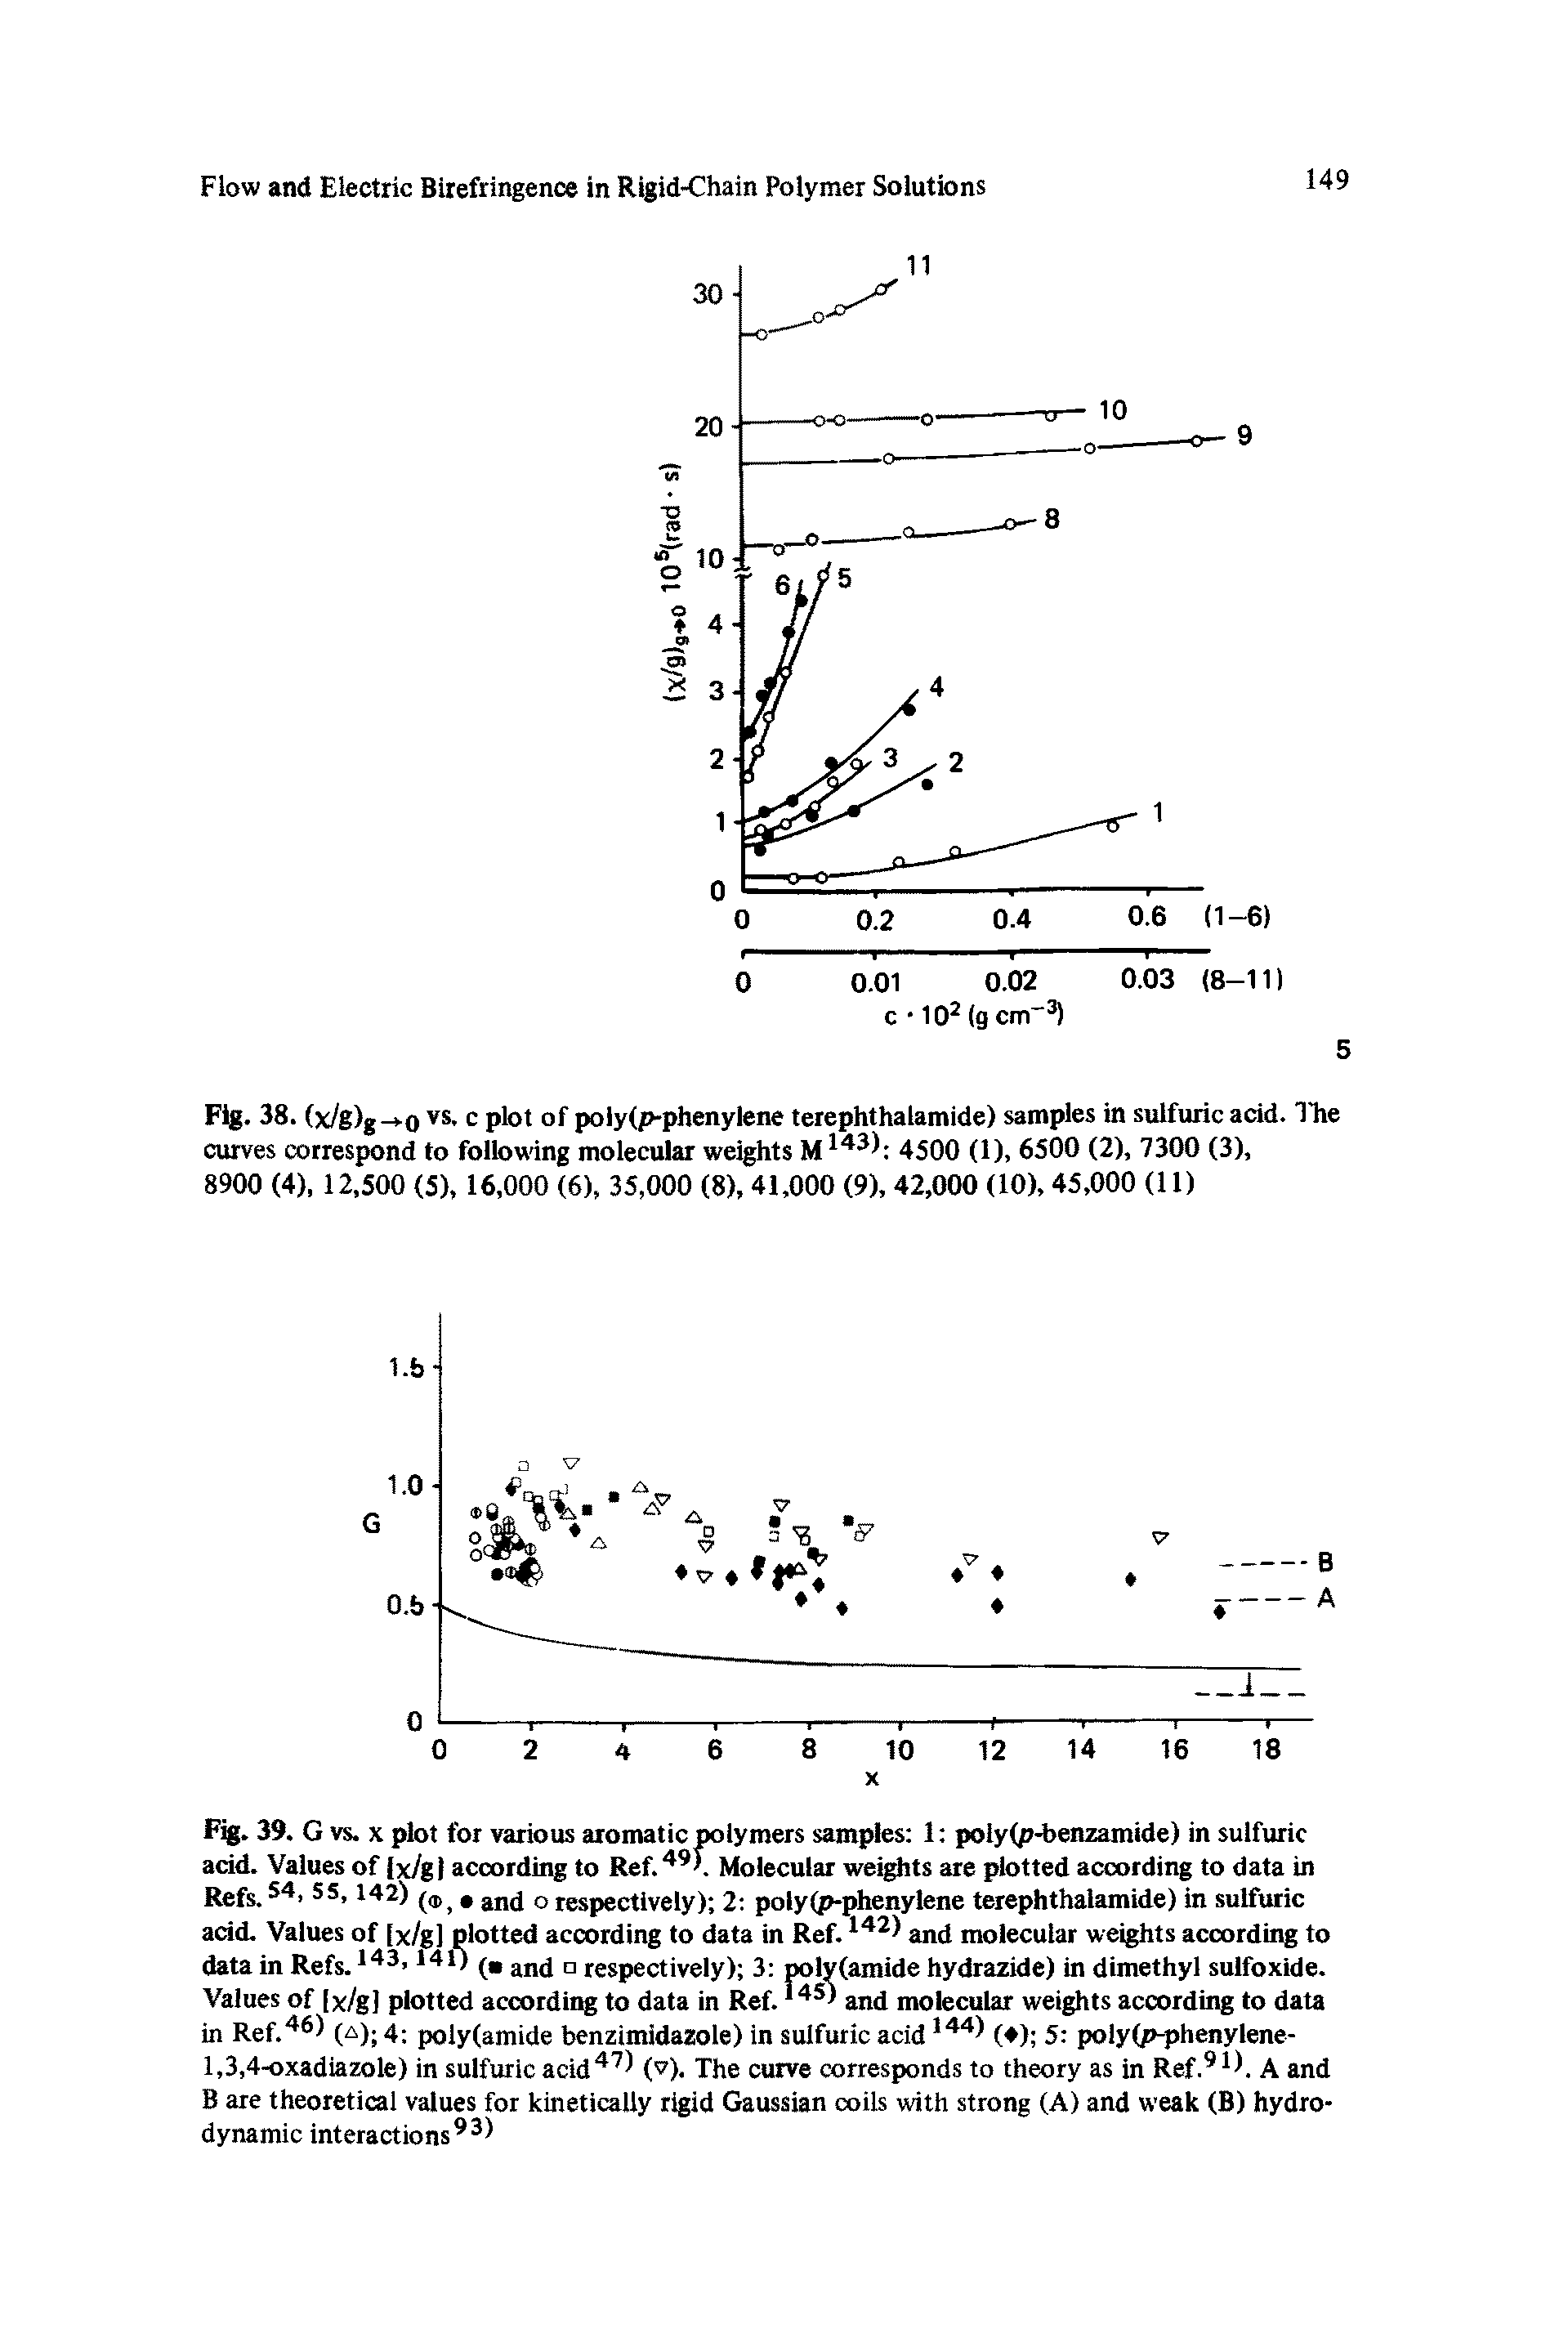 Fig. 39. G vs. X plot for various aromatic polymers samples 1 poly(p-benzamide) in sulfuric acid. Values of lx/g according to Ref. 44). Molecular weights are plotted according to data in Refs. 4, 55,142) (,1,, gjij Q respectively) 2 poly(p-phenylene terephthalamide) in sulfuric acid. Values of [x/g] plotted according to data in Ref. 143) and molecular weights according to data in Refs. 143,14i) respectively) 3 poly(amide hydrazide) in dimethyl sulfoxide.